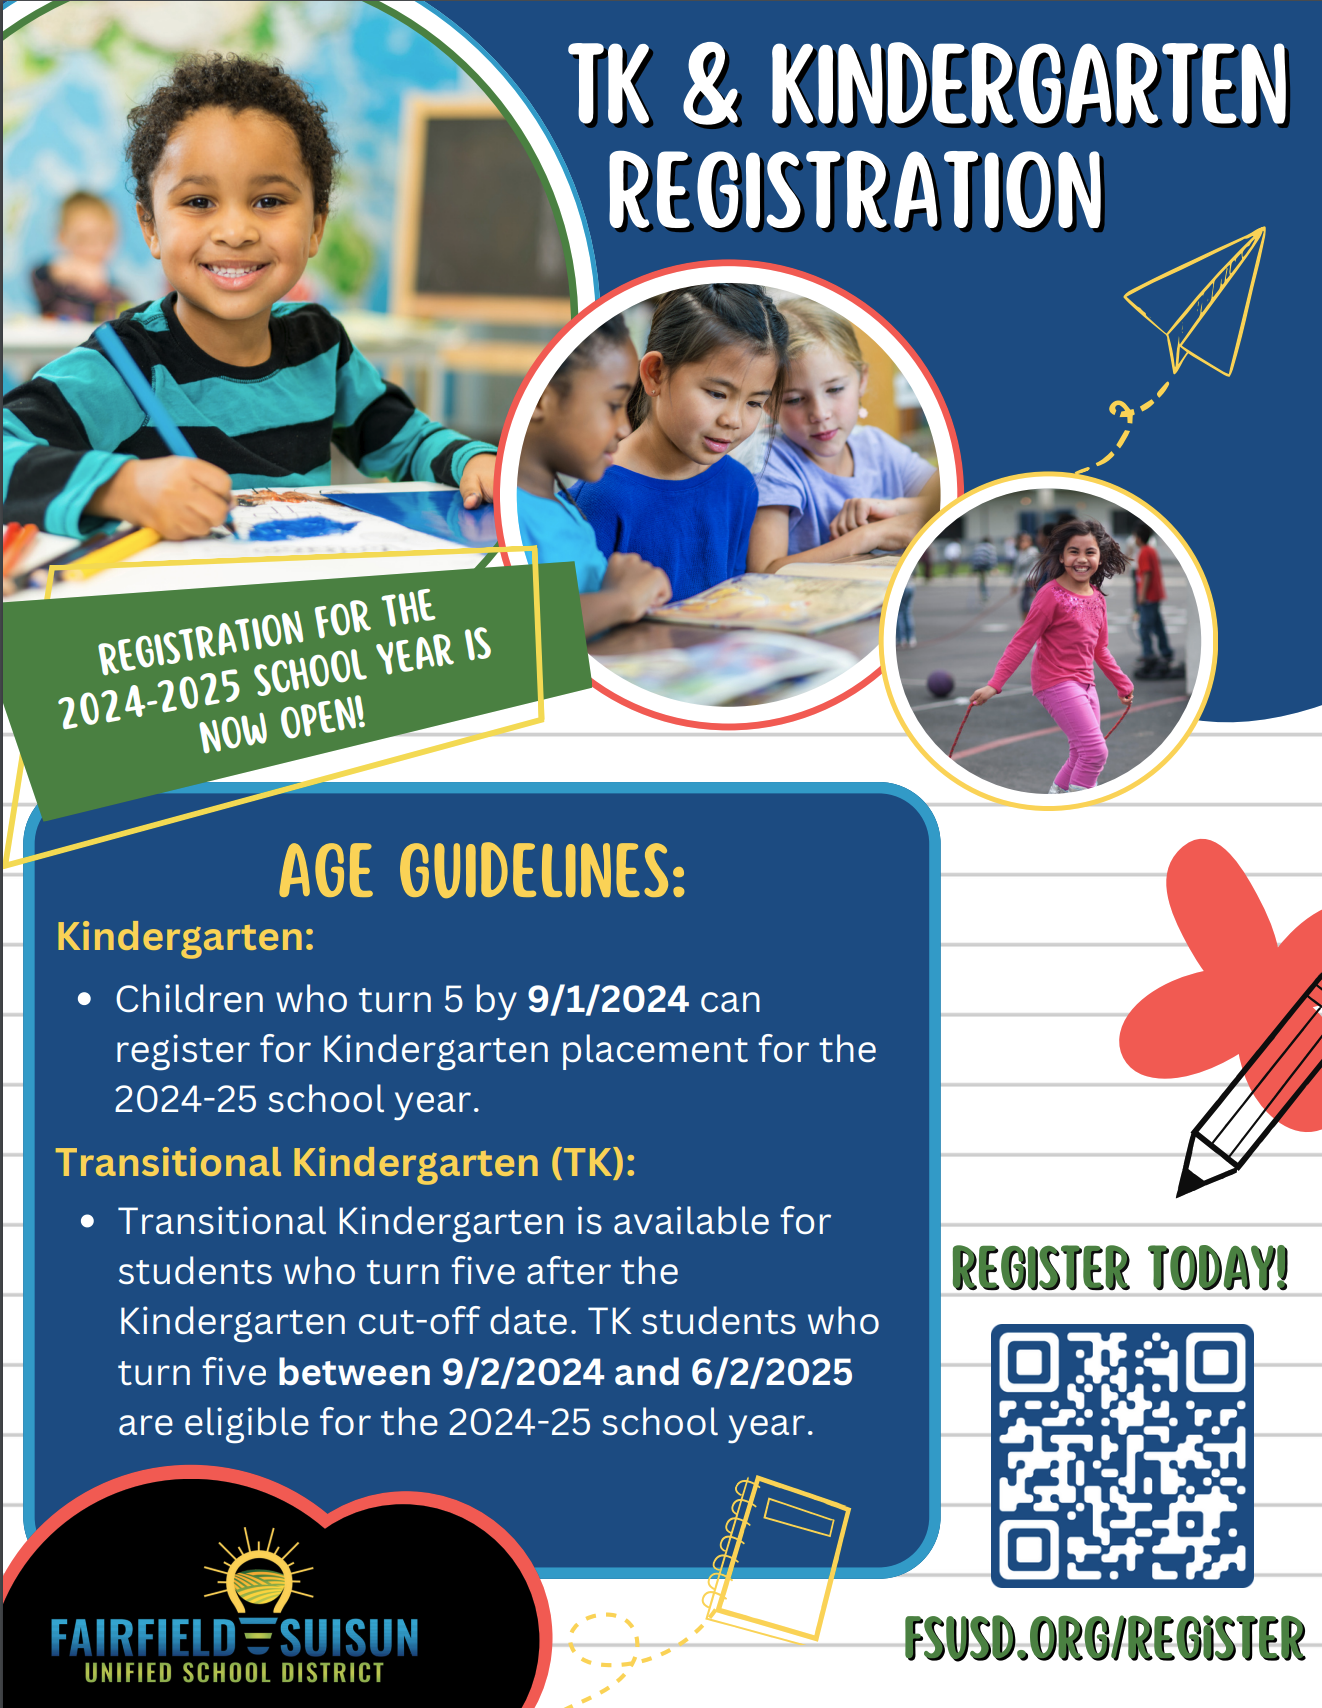 TK & Kindergarten Registration - Age guidelines: Kindergarten - Children who turn 5 by 9/1/2024 can register for Kindergarten placement for the 2024-25 school year. Transitional Kindergarten (TK) is available for students who turn five after the Kindergarten cut-off date. TK students who turn five between 9/2/2024 and 6/2/2025 are eligible for the 2024-25 school year.